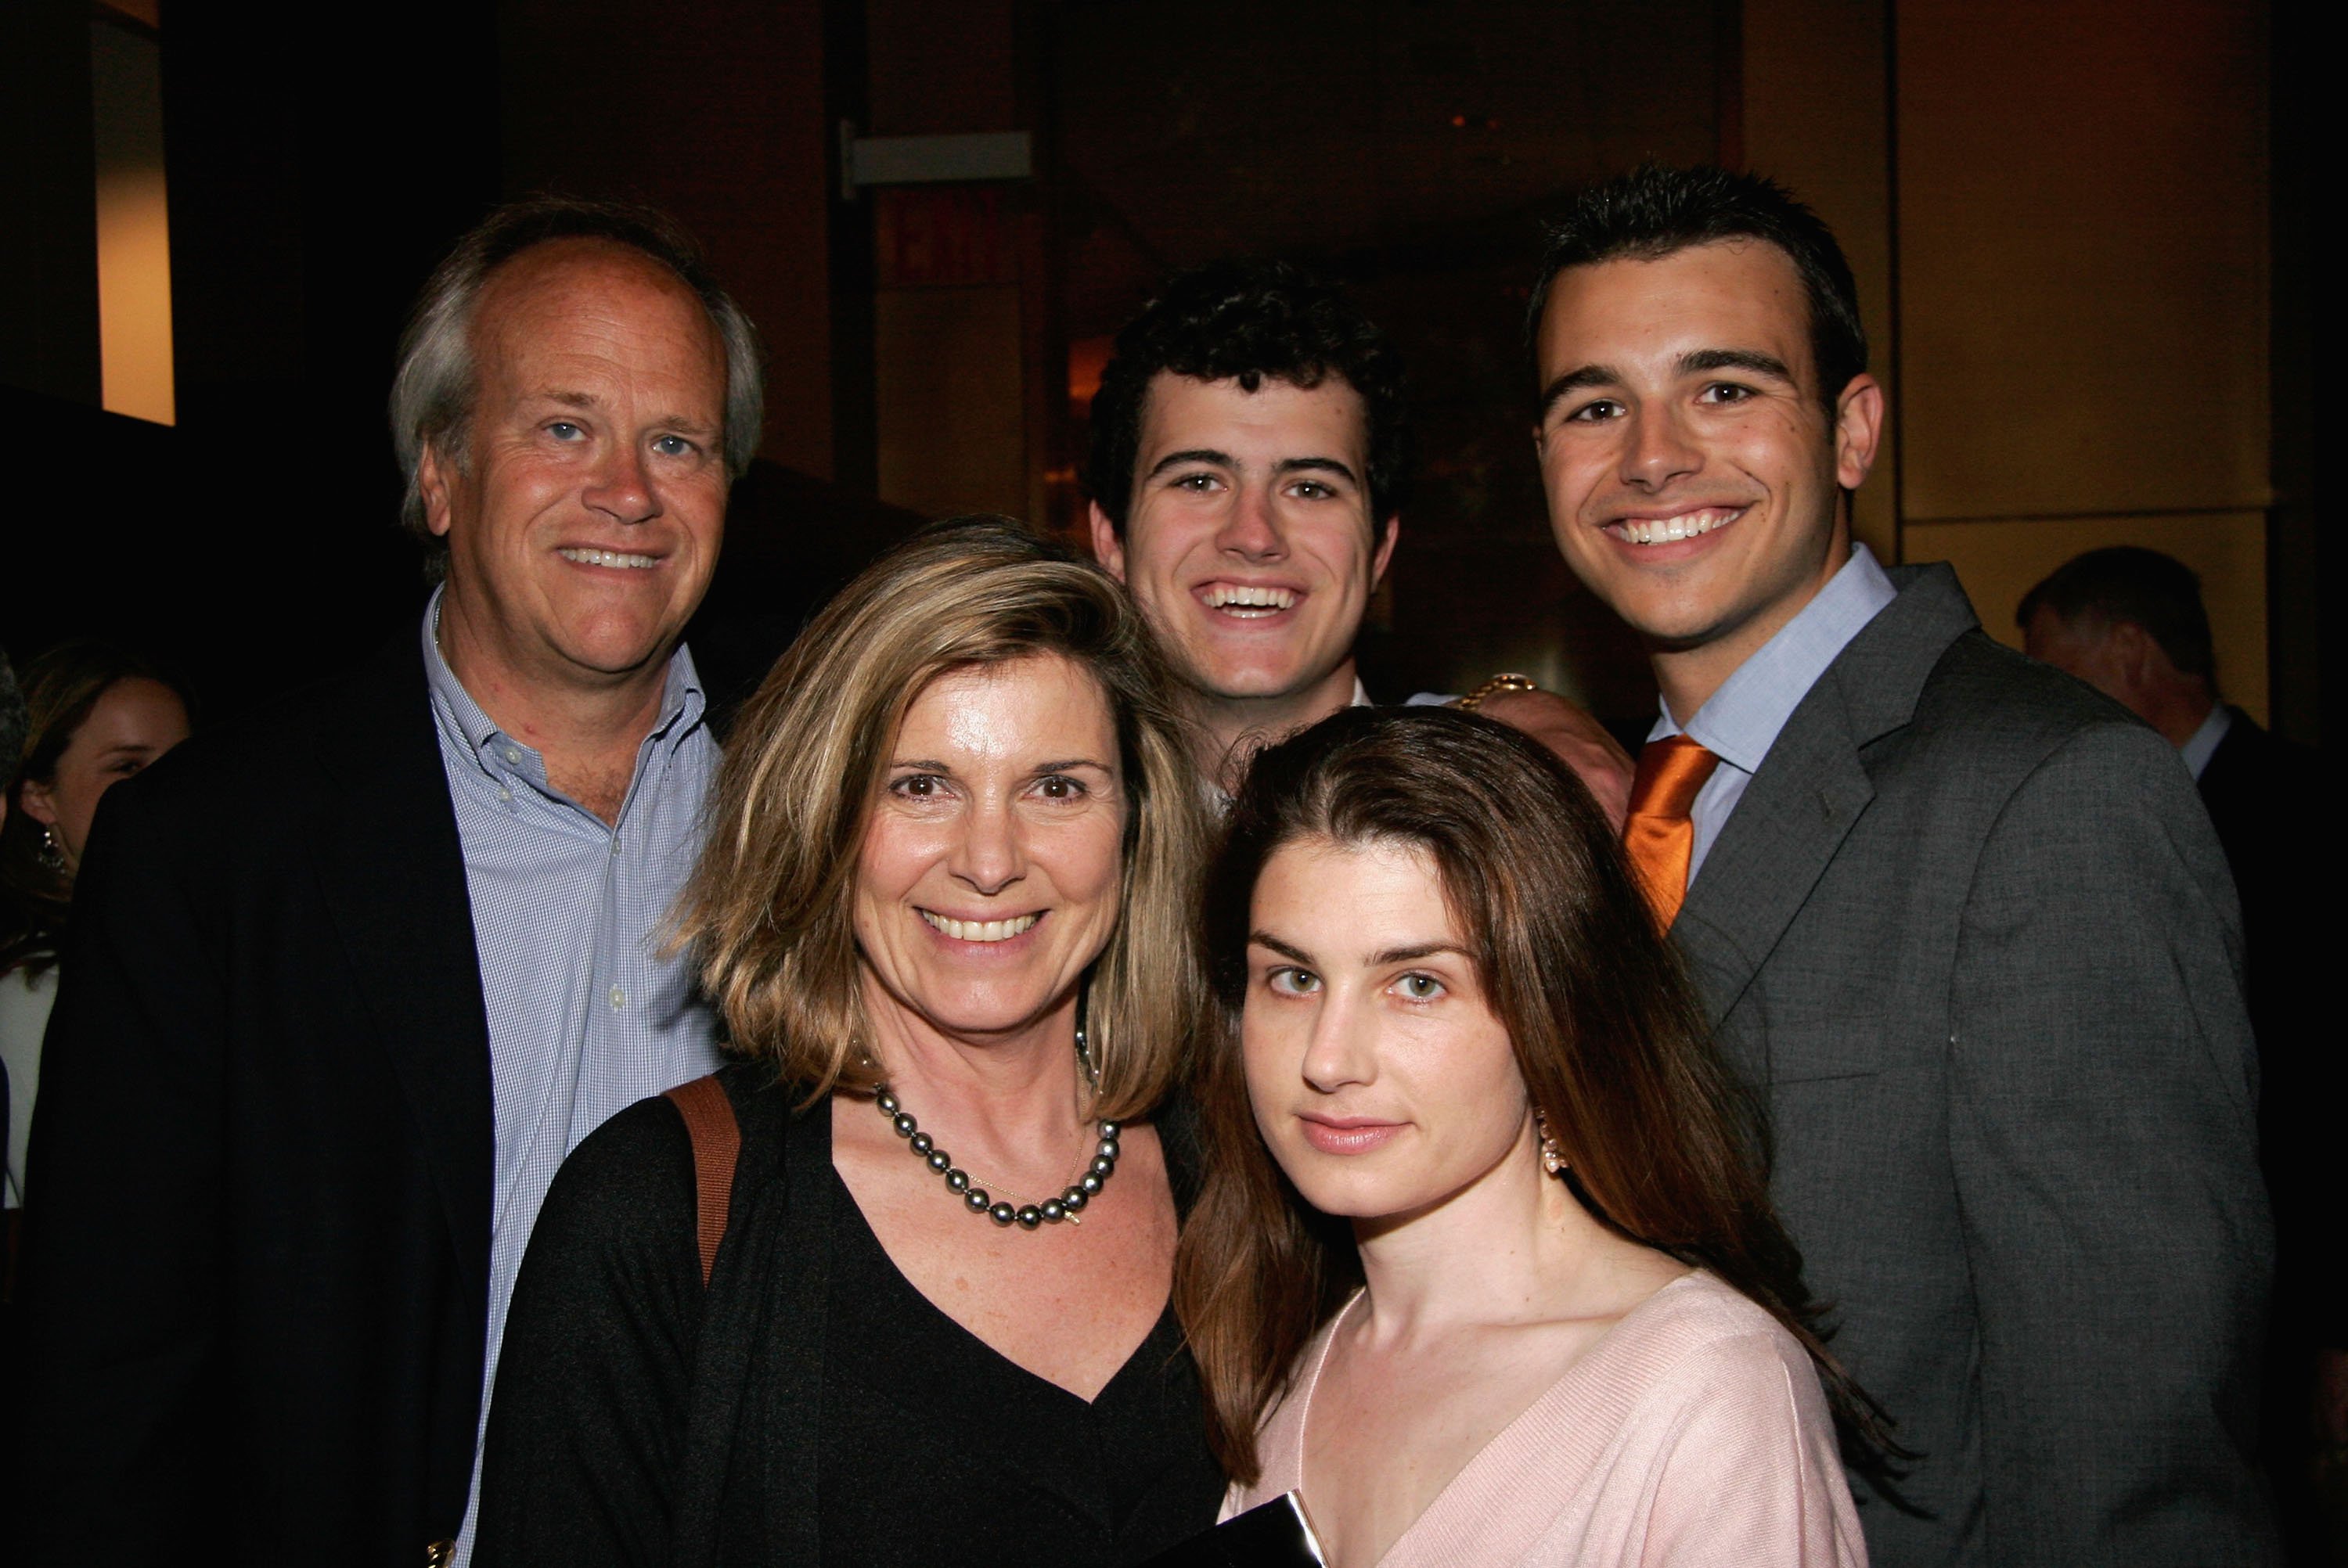  (L-R) Dick Ebersol with his sons, director Willie Ebersol and producer Charlie Ebersol with mom Susan St. James (L) and daughter Sunshine Lucas in the front during the screening of "Ithuteng" held at the MGM screening room June 23, 2005 in New York City. Photo: Getty Images